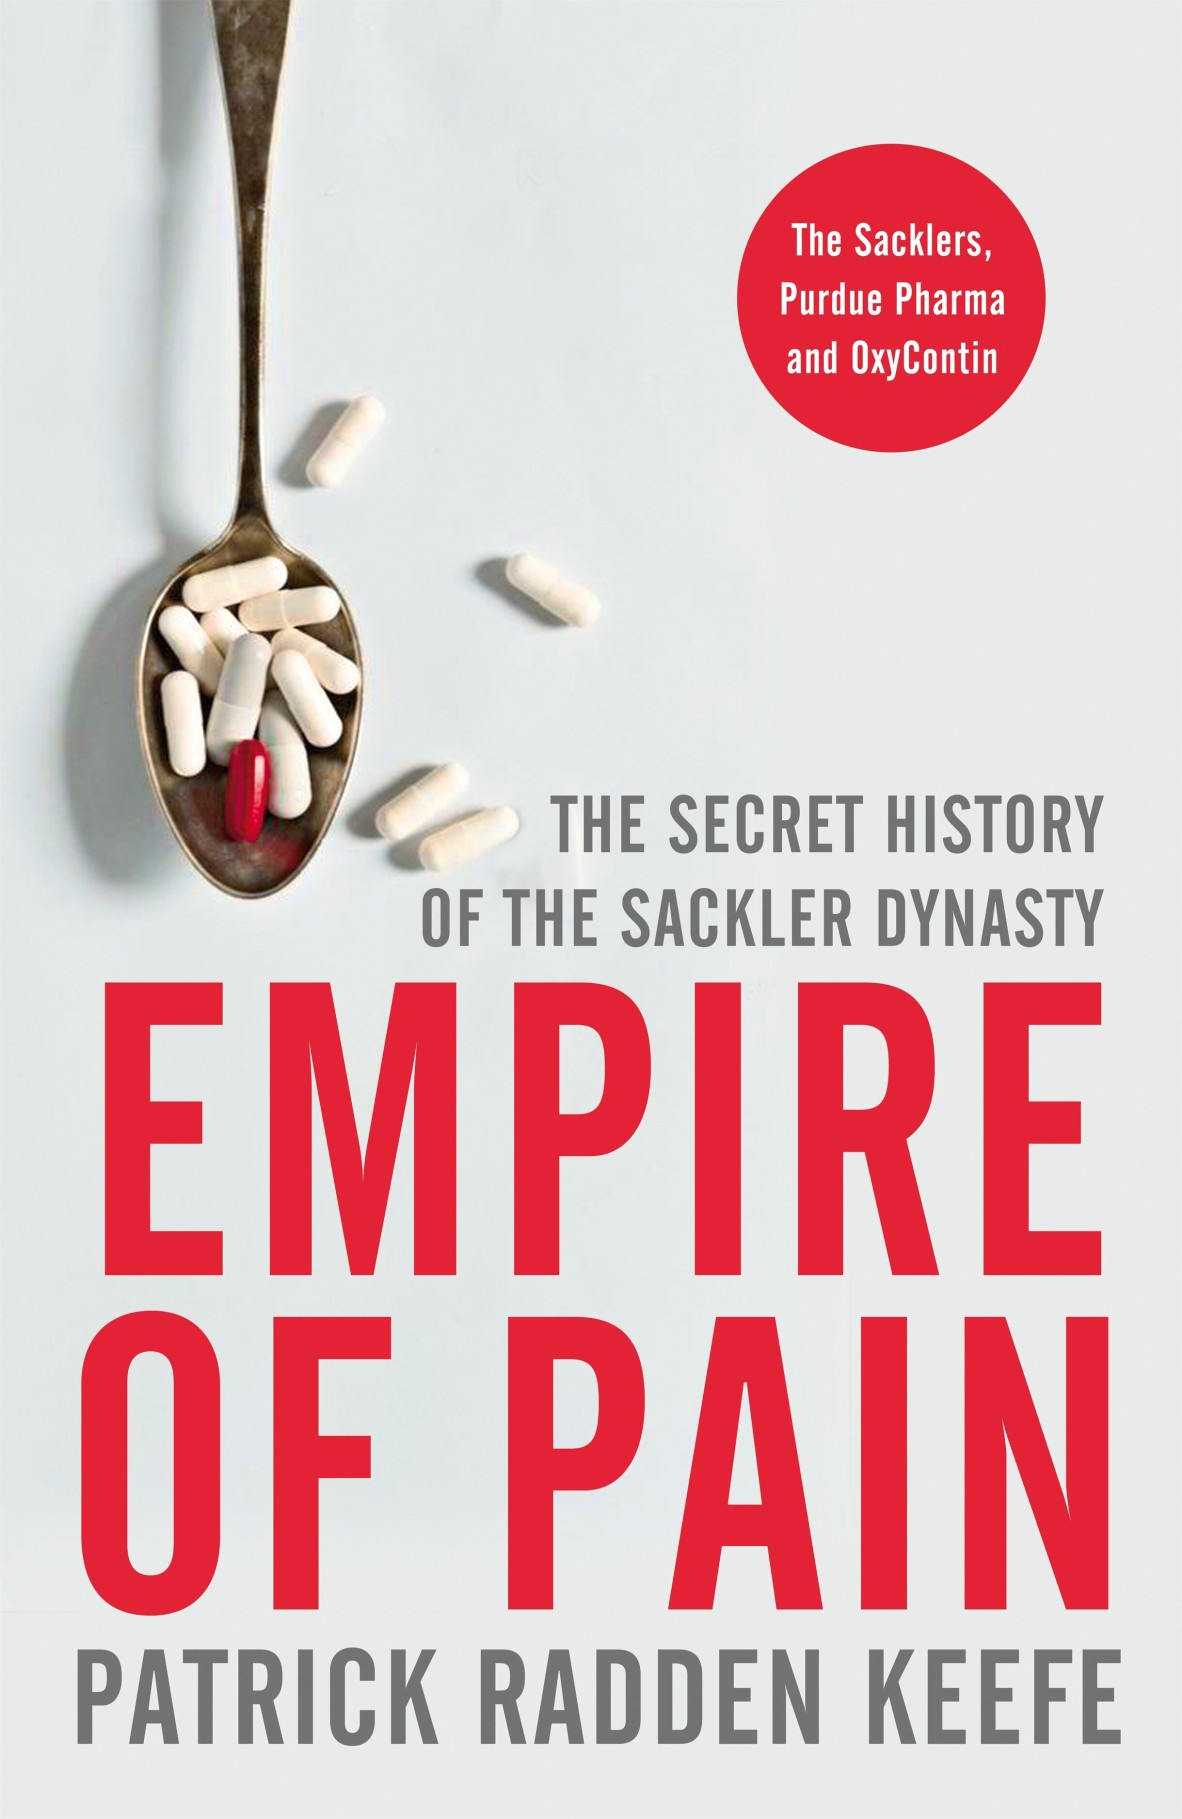 Empire of Pain by Patrick Radden Keefe - the cover shows a spoon with red and white pills overflowing